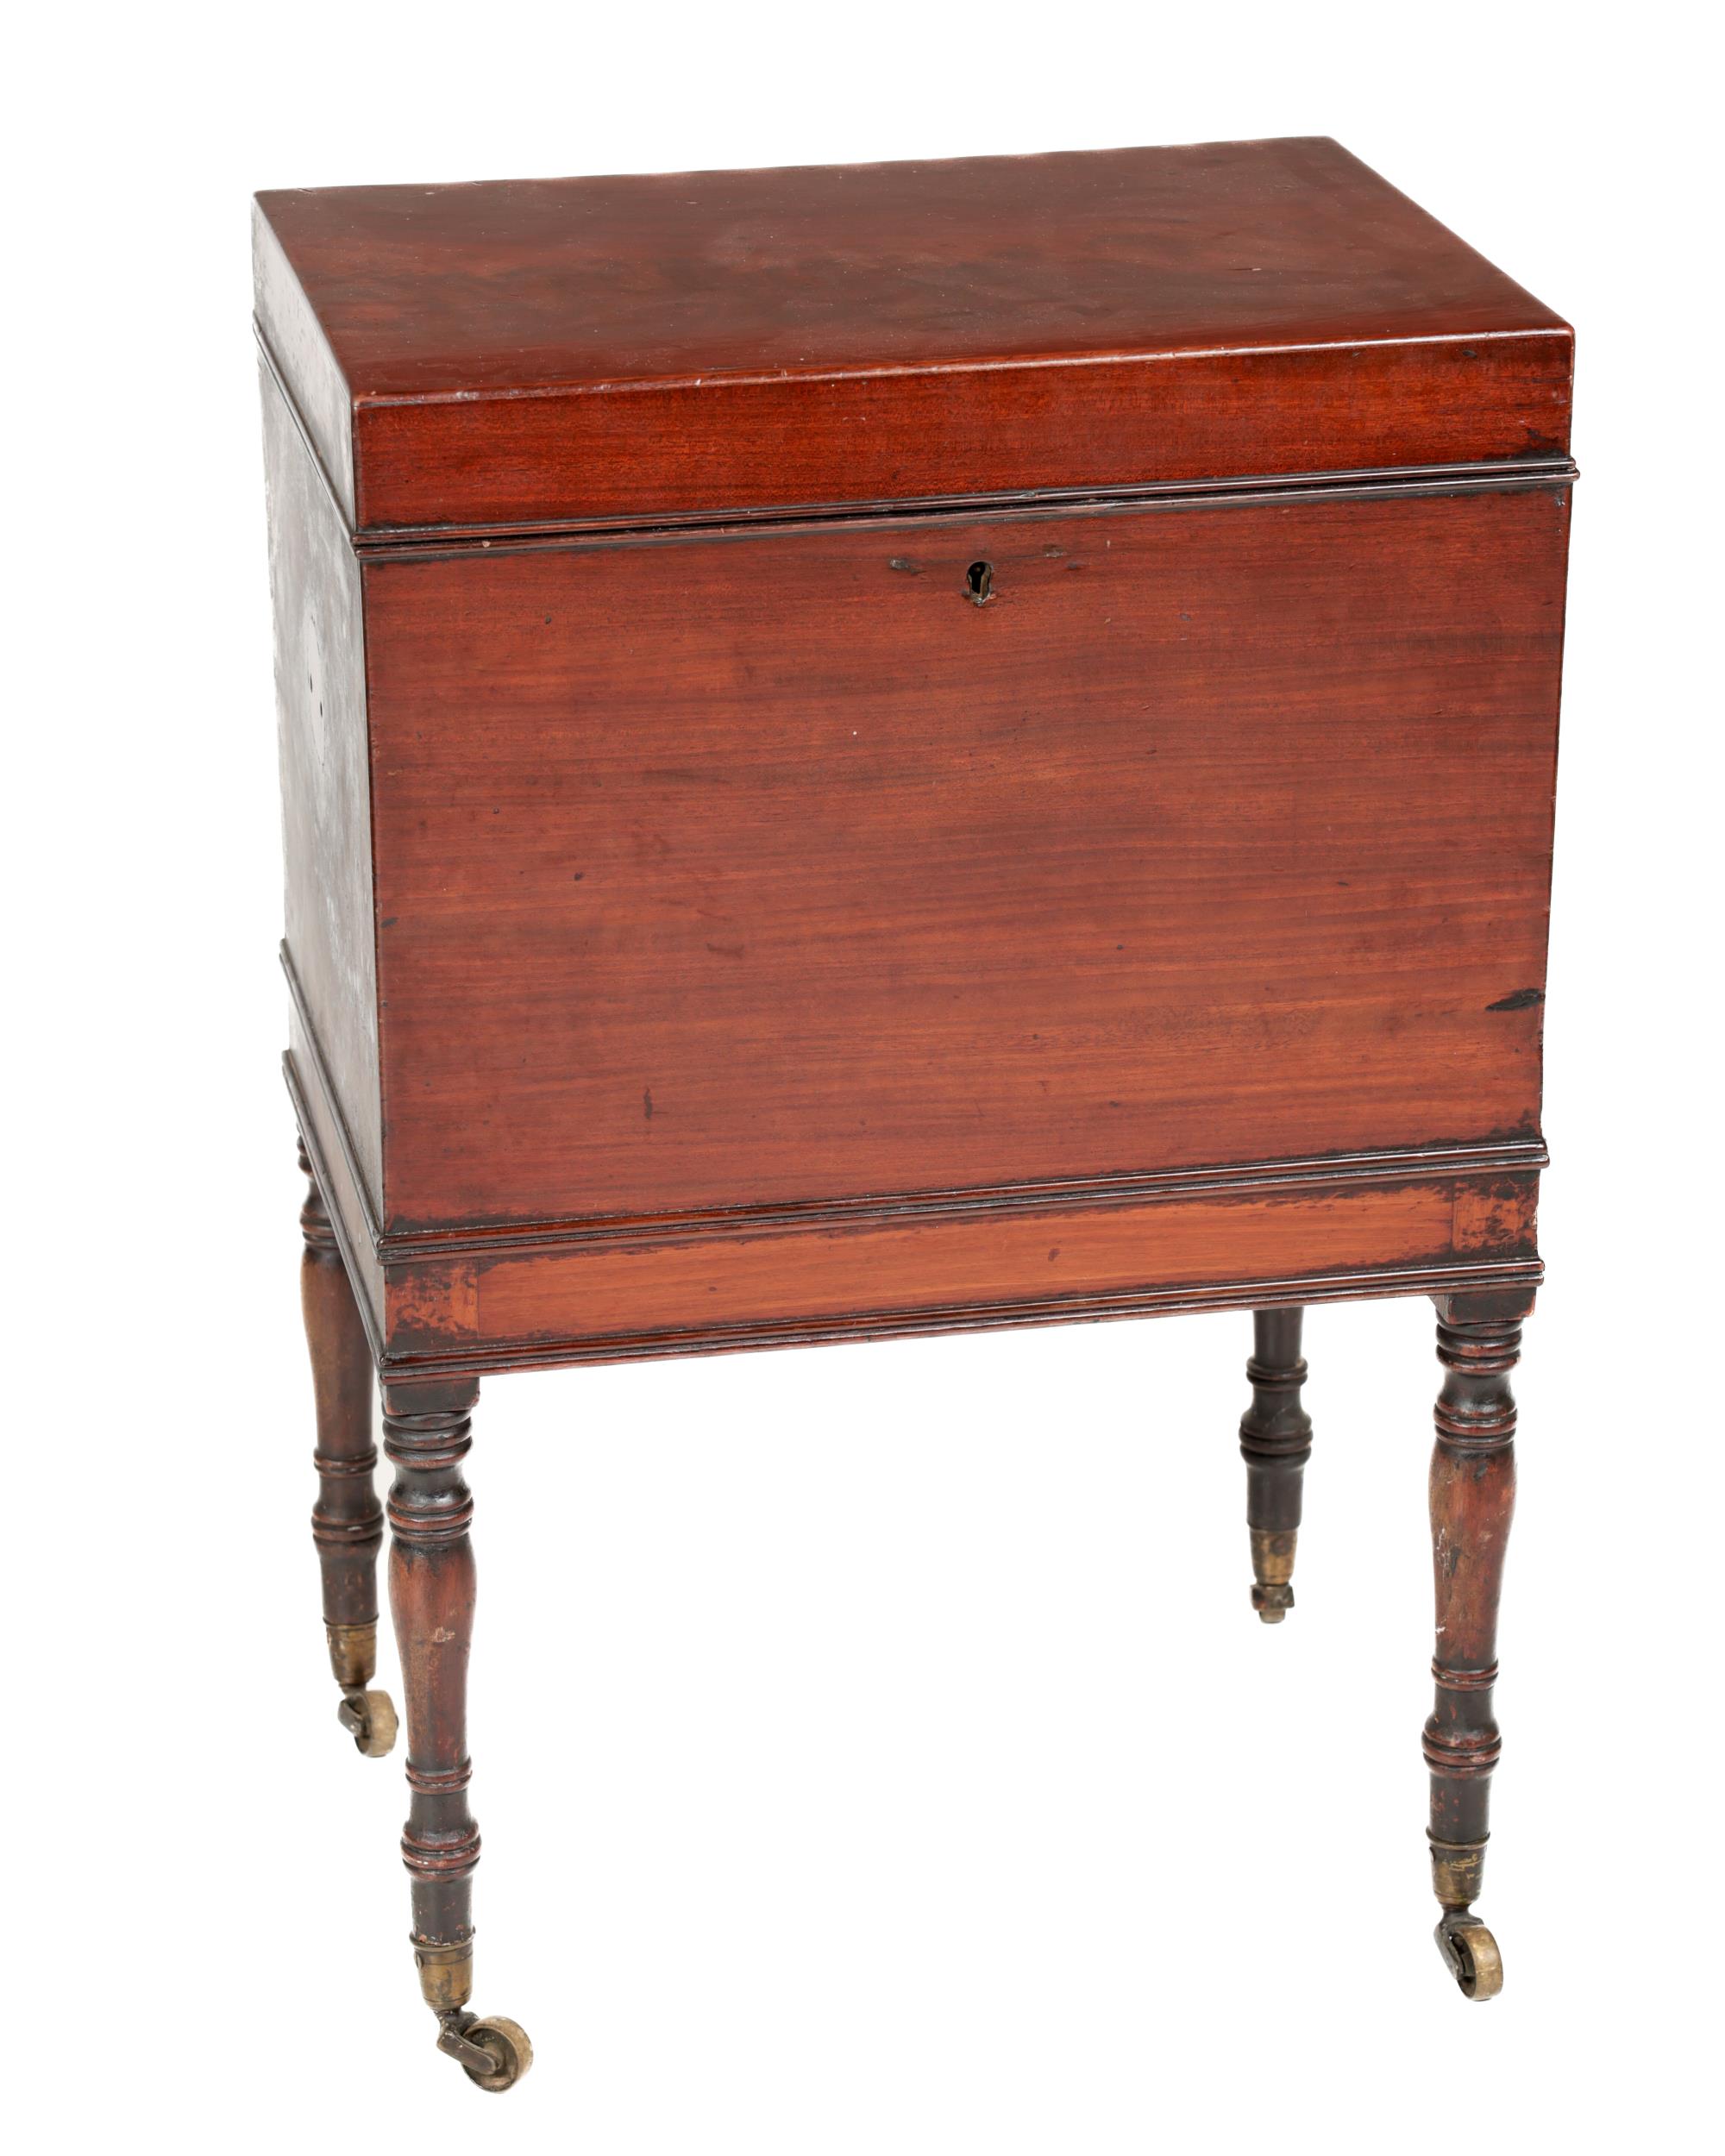 A Georgian period mahogany Tea Caddy, on stand, the lift top opening to reveal metal lined